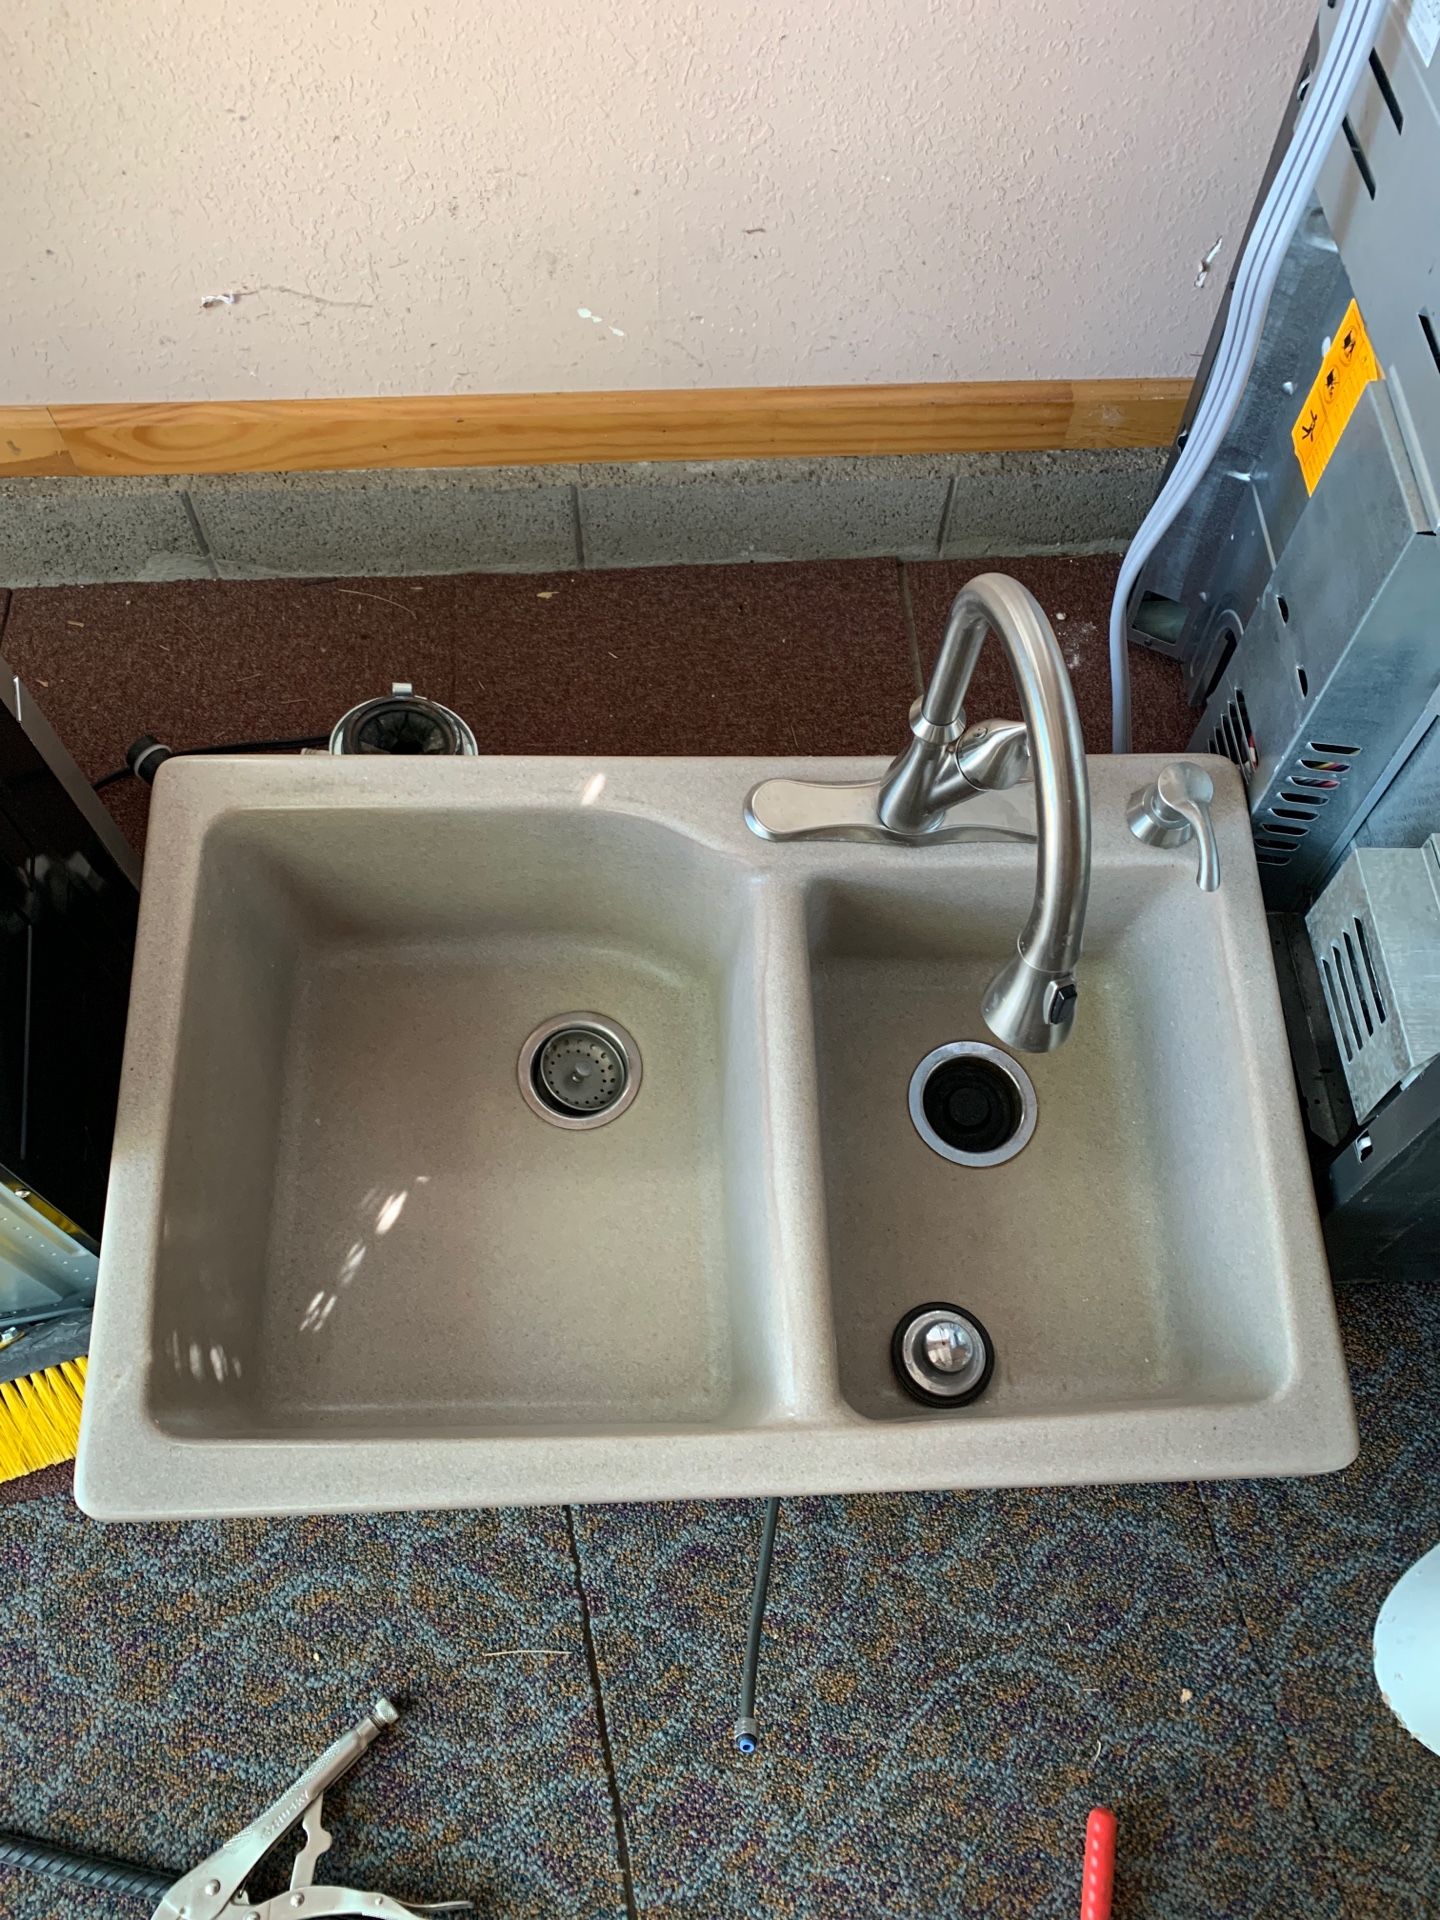 Sink and 3 toilets